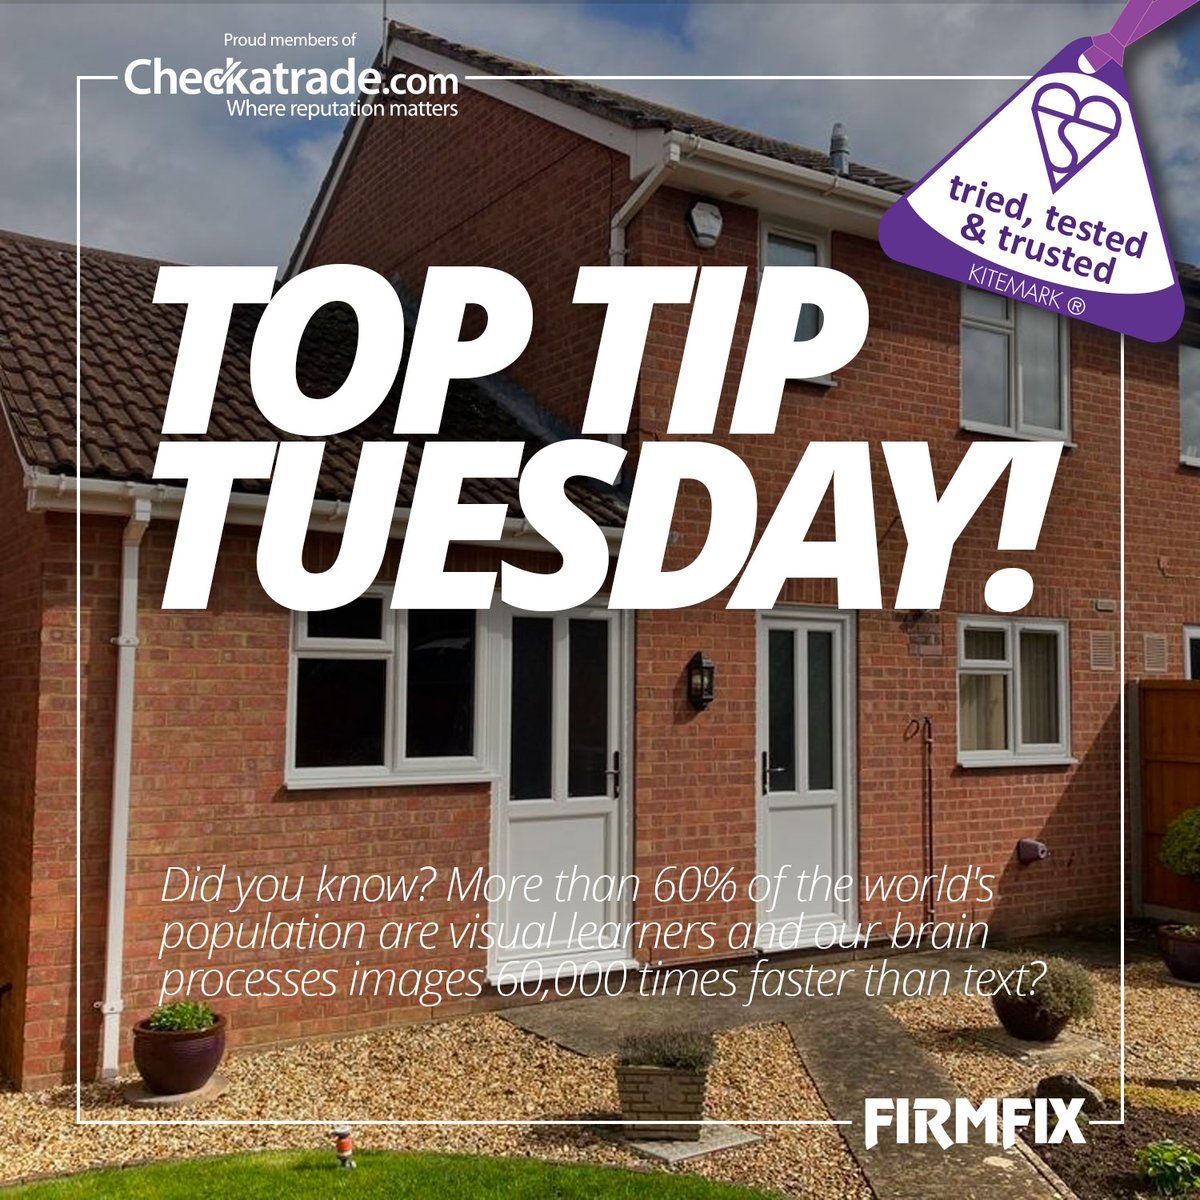 #TopTipTuesday: Visualise before you choose! With 60% of us being visual learners, imagine how new windows, doors, or conservatories will look in your home. 🏡 Firmfix offers a wide range of styles to help you achieve your perfect aesthetic. Questions? We’re here to help!